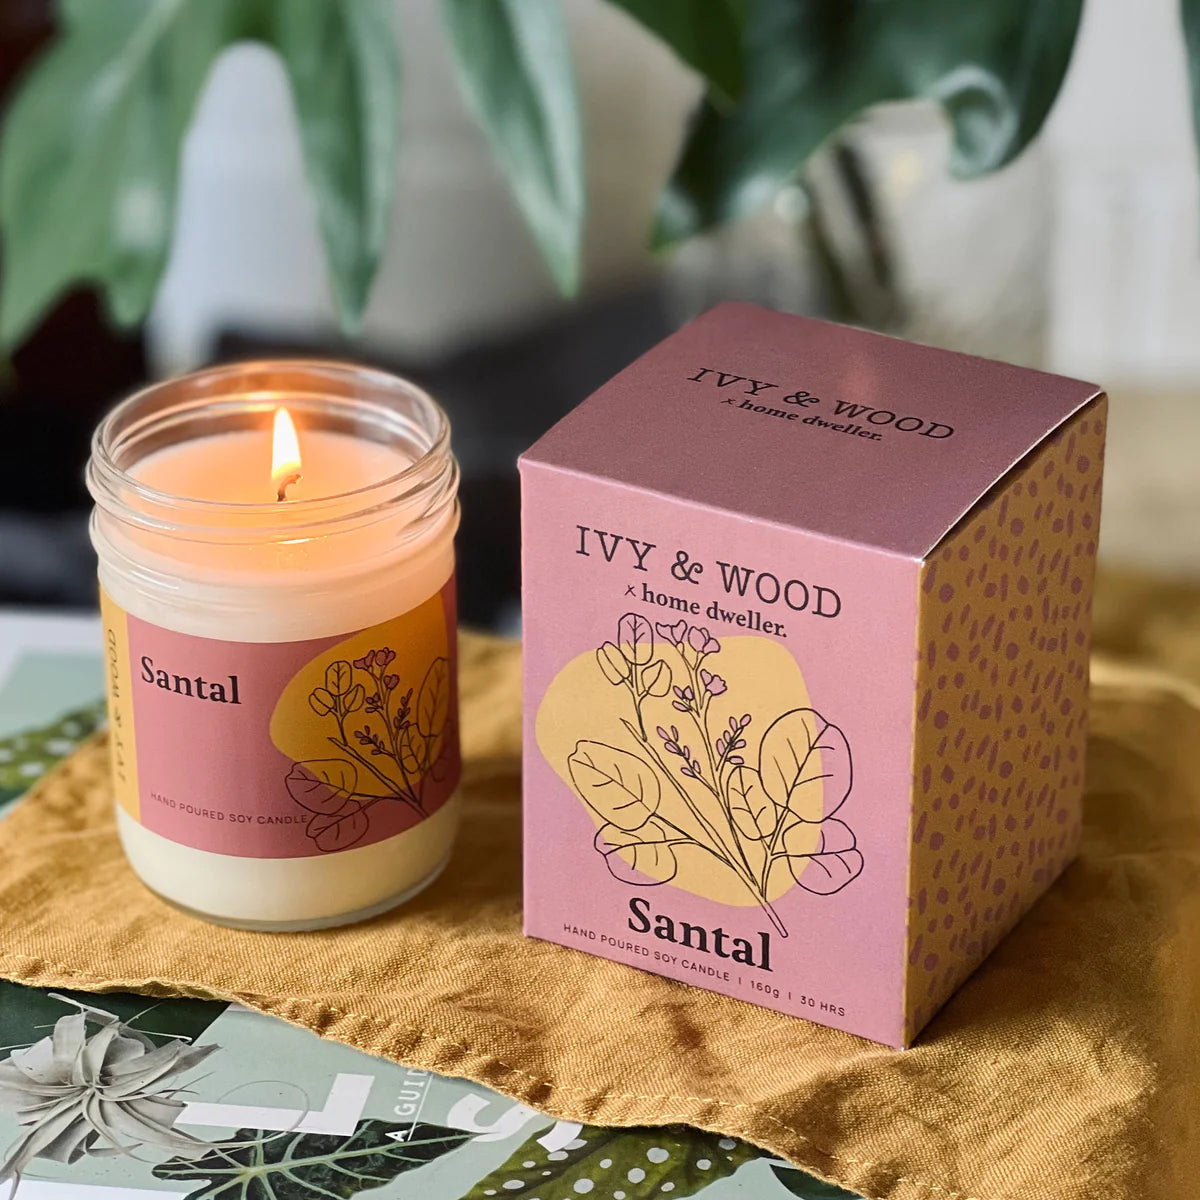 IVY & WOOD - Santal Scented Candle 'Homebody' Collection